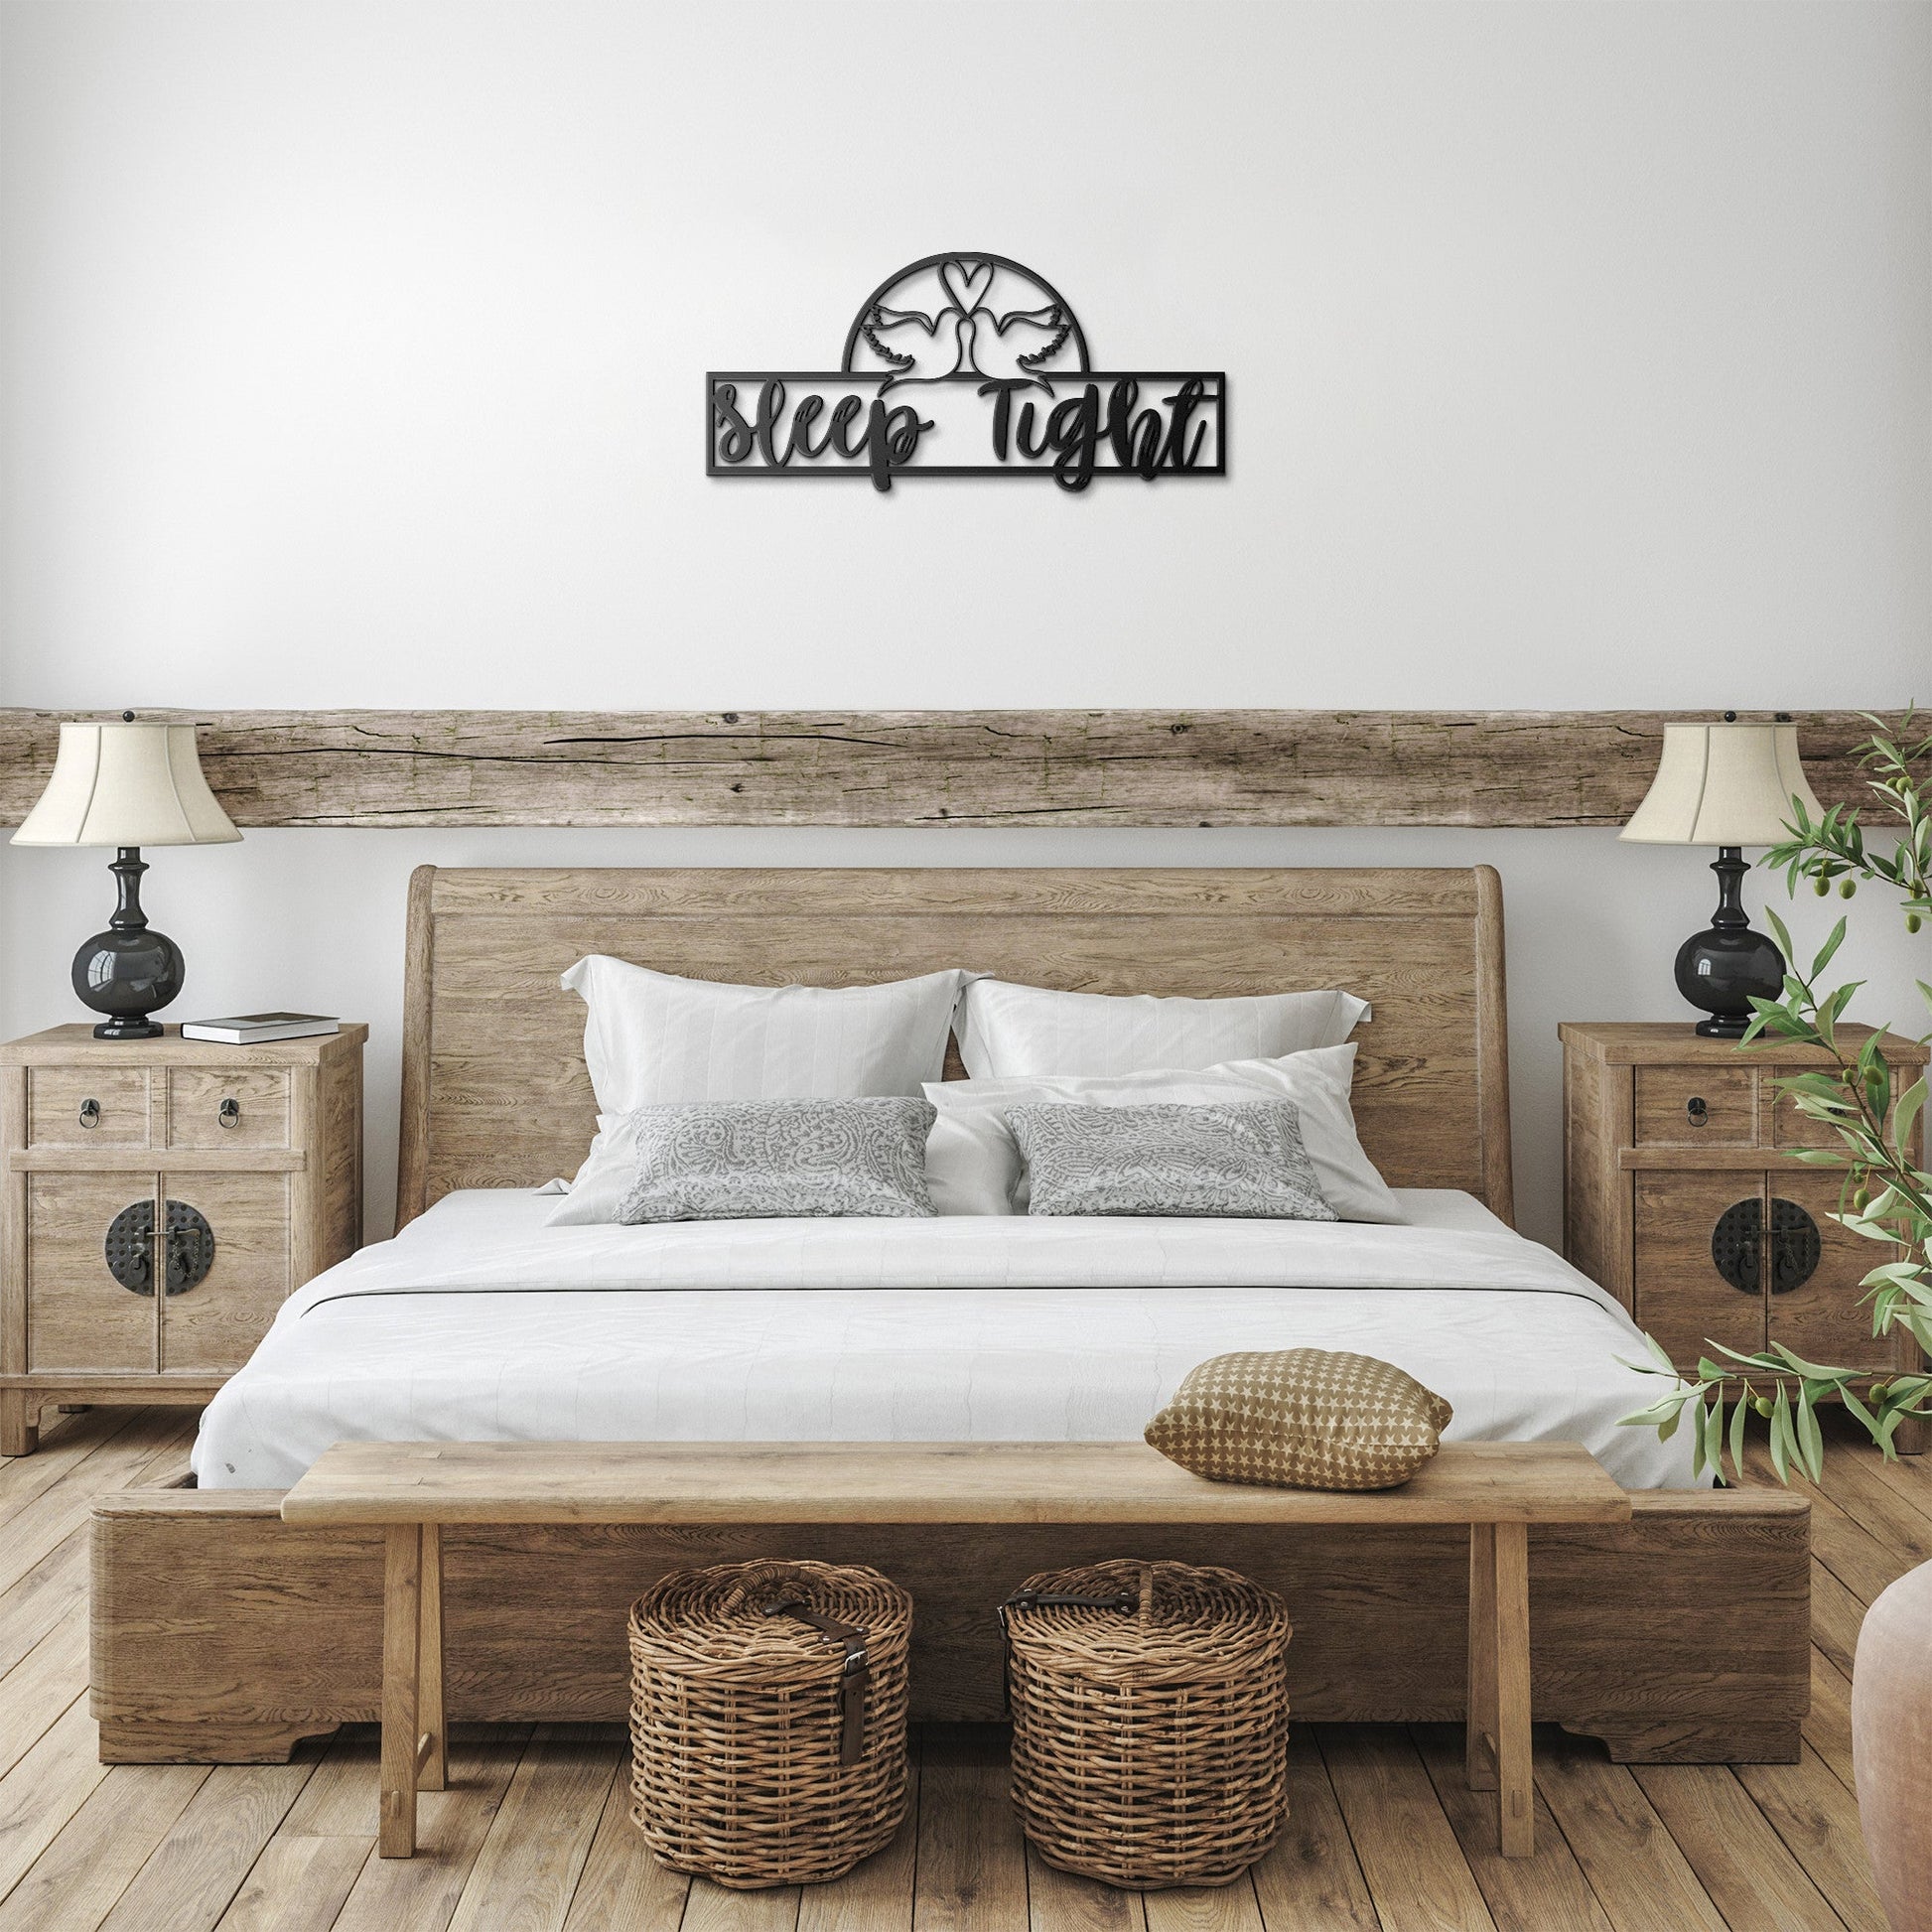 Sleep Tight Metal Sign: Beautiful Above Bed Art for Serene Nights - Stylinsoul